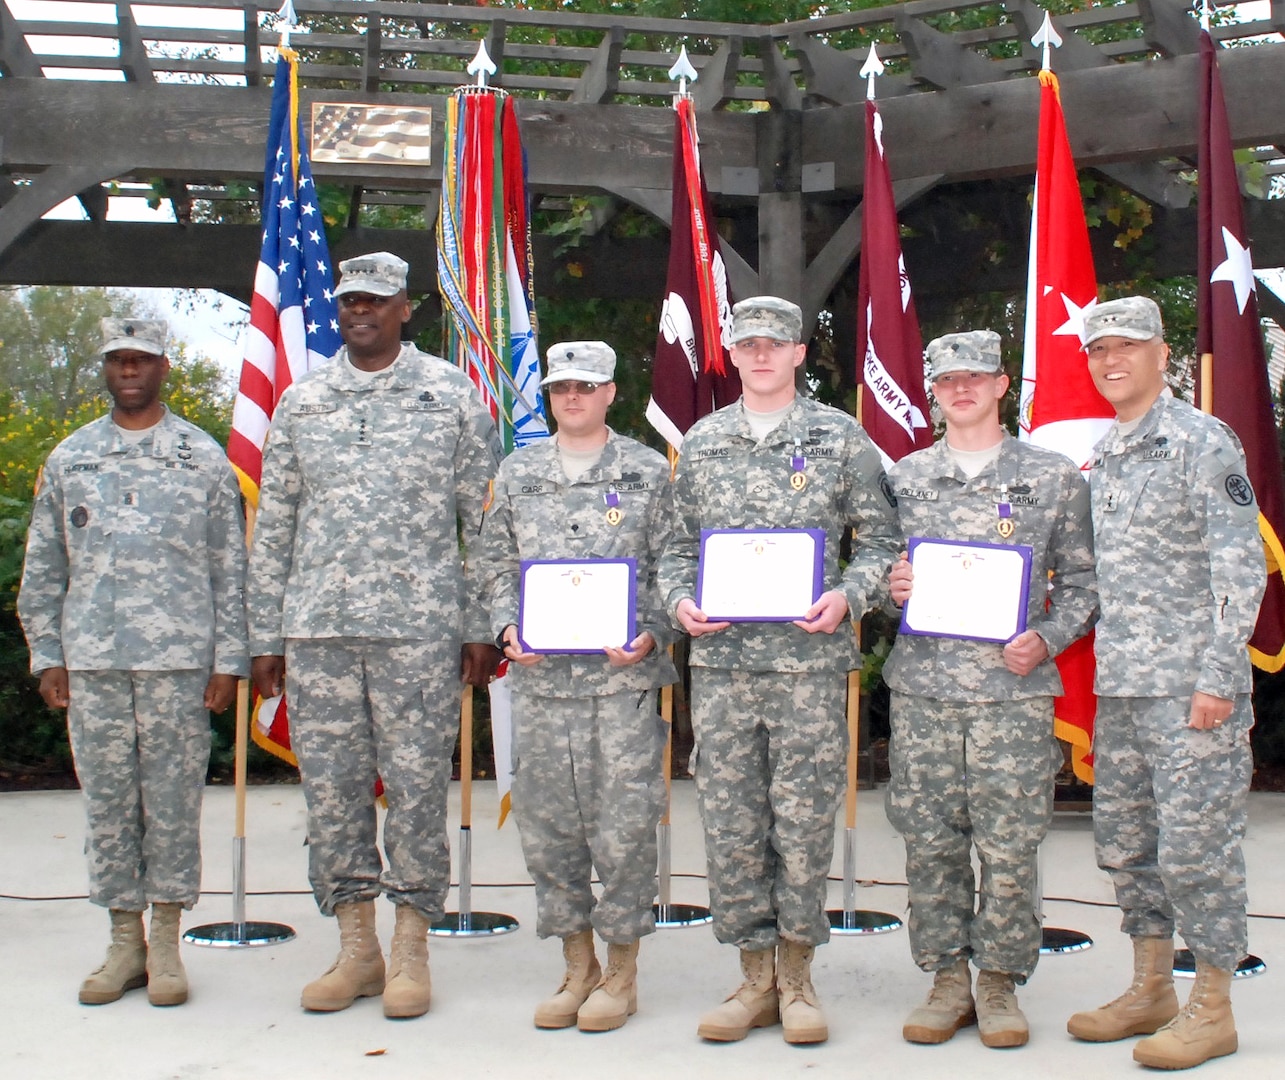 Photo by Robert Shields
(From left) Southern Regional Medical Command and Brooke Army Medical Center Command Sgt. Maj. Marshall Huffman, Army Vice Chief of Staff Gen. Lloyd J. Austin III, Spc. Marcus Carr, Pfc. Ryan Thomas, Spc. Christopher Delaney, and BAMC and SRMC Commander Maj. Gen. M. Ted Wong after the Purple Heart ceremony at the Warrior and Family Support Center Dec. 3. Austin awarded the Purple Heart medals and certificates to the recipients.
